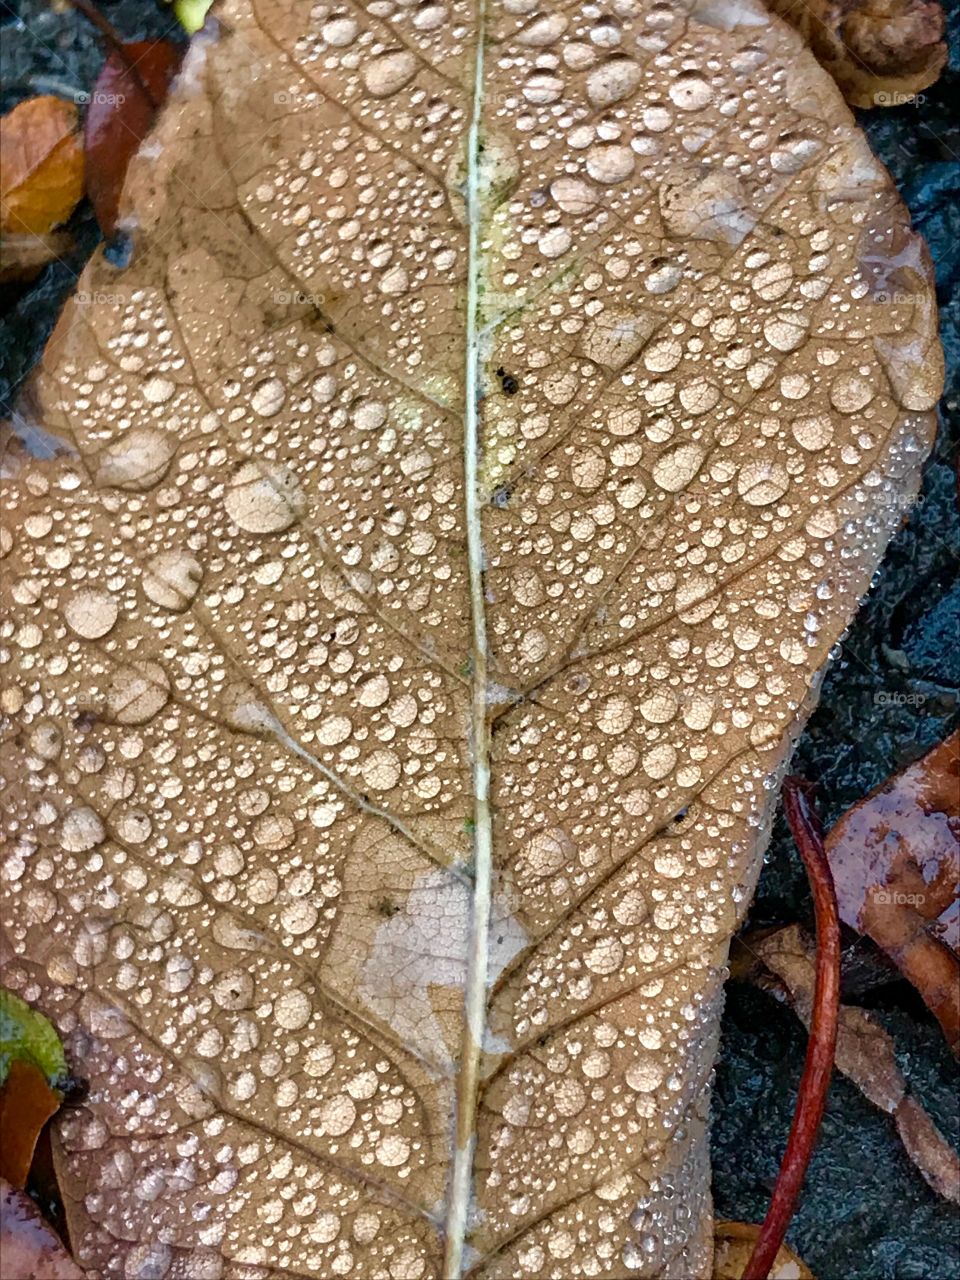 Leaf after the rain